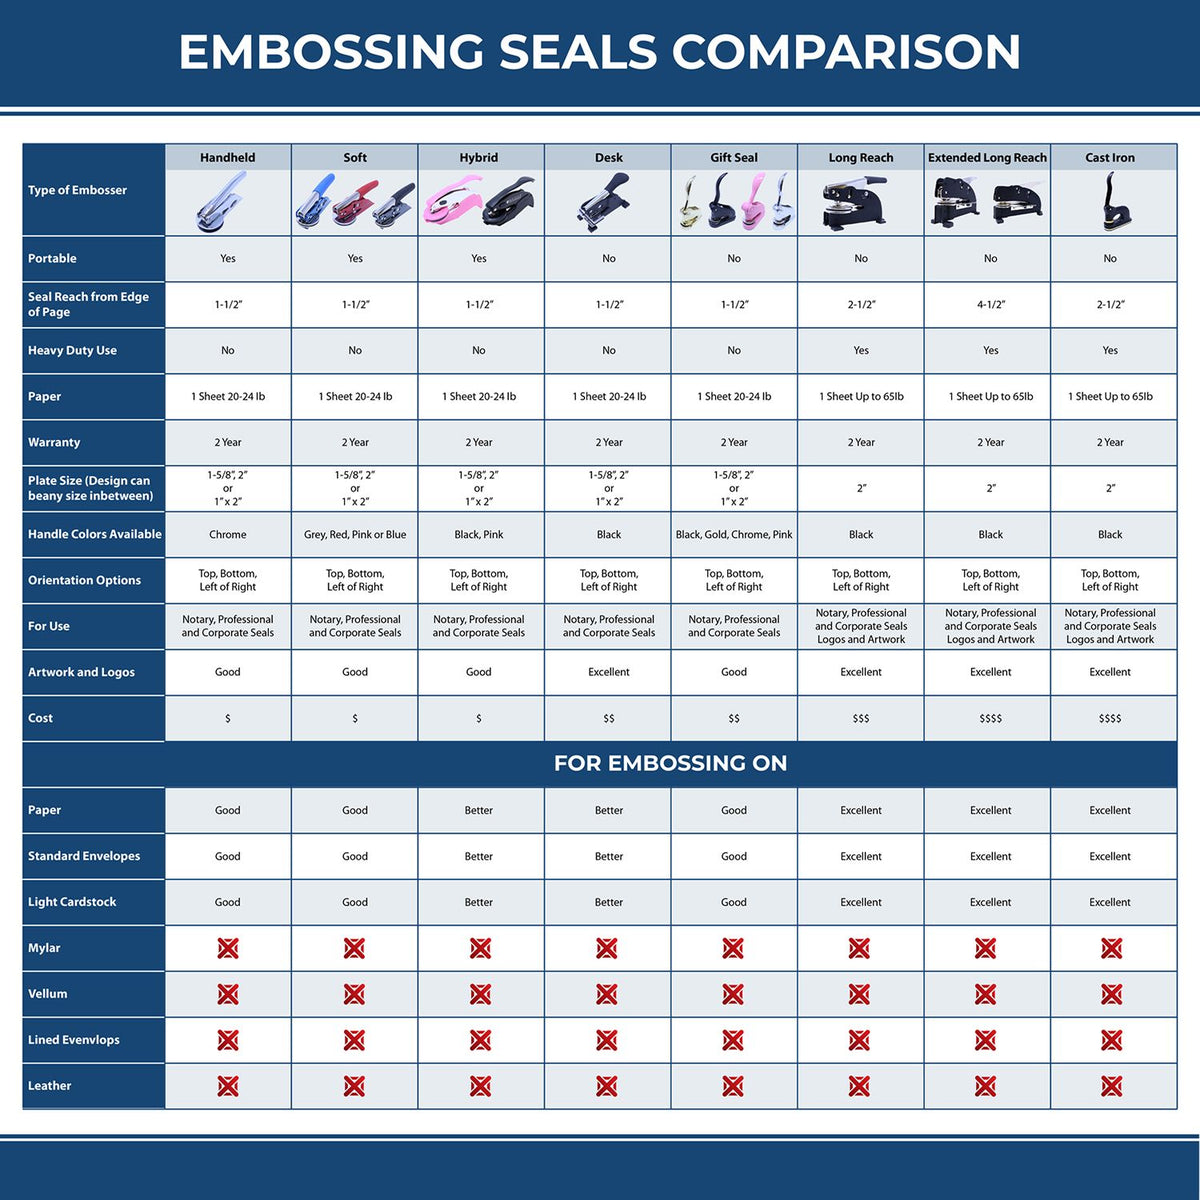 A comparison chart for the different types of mount models available for the Extended Long Reach Minnesota Architect Seal Embosser.